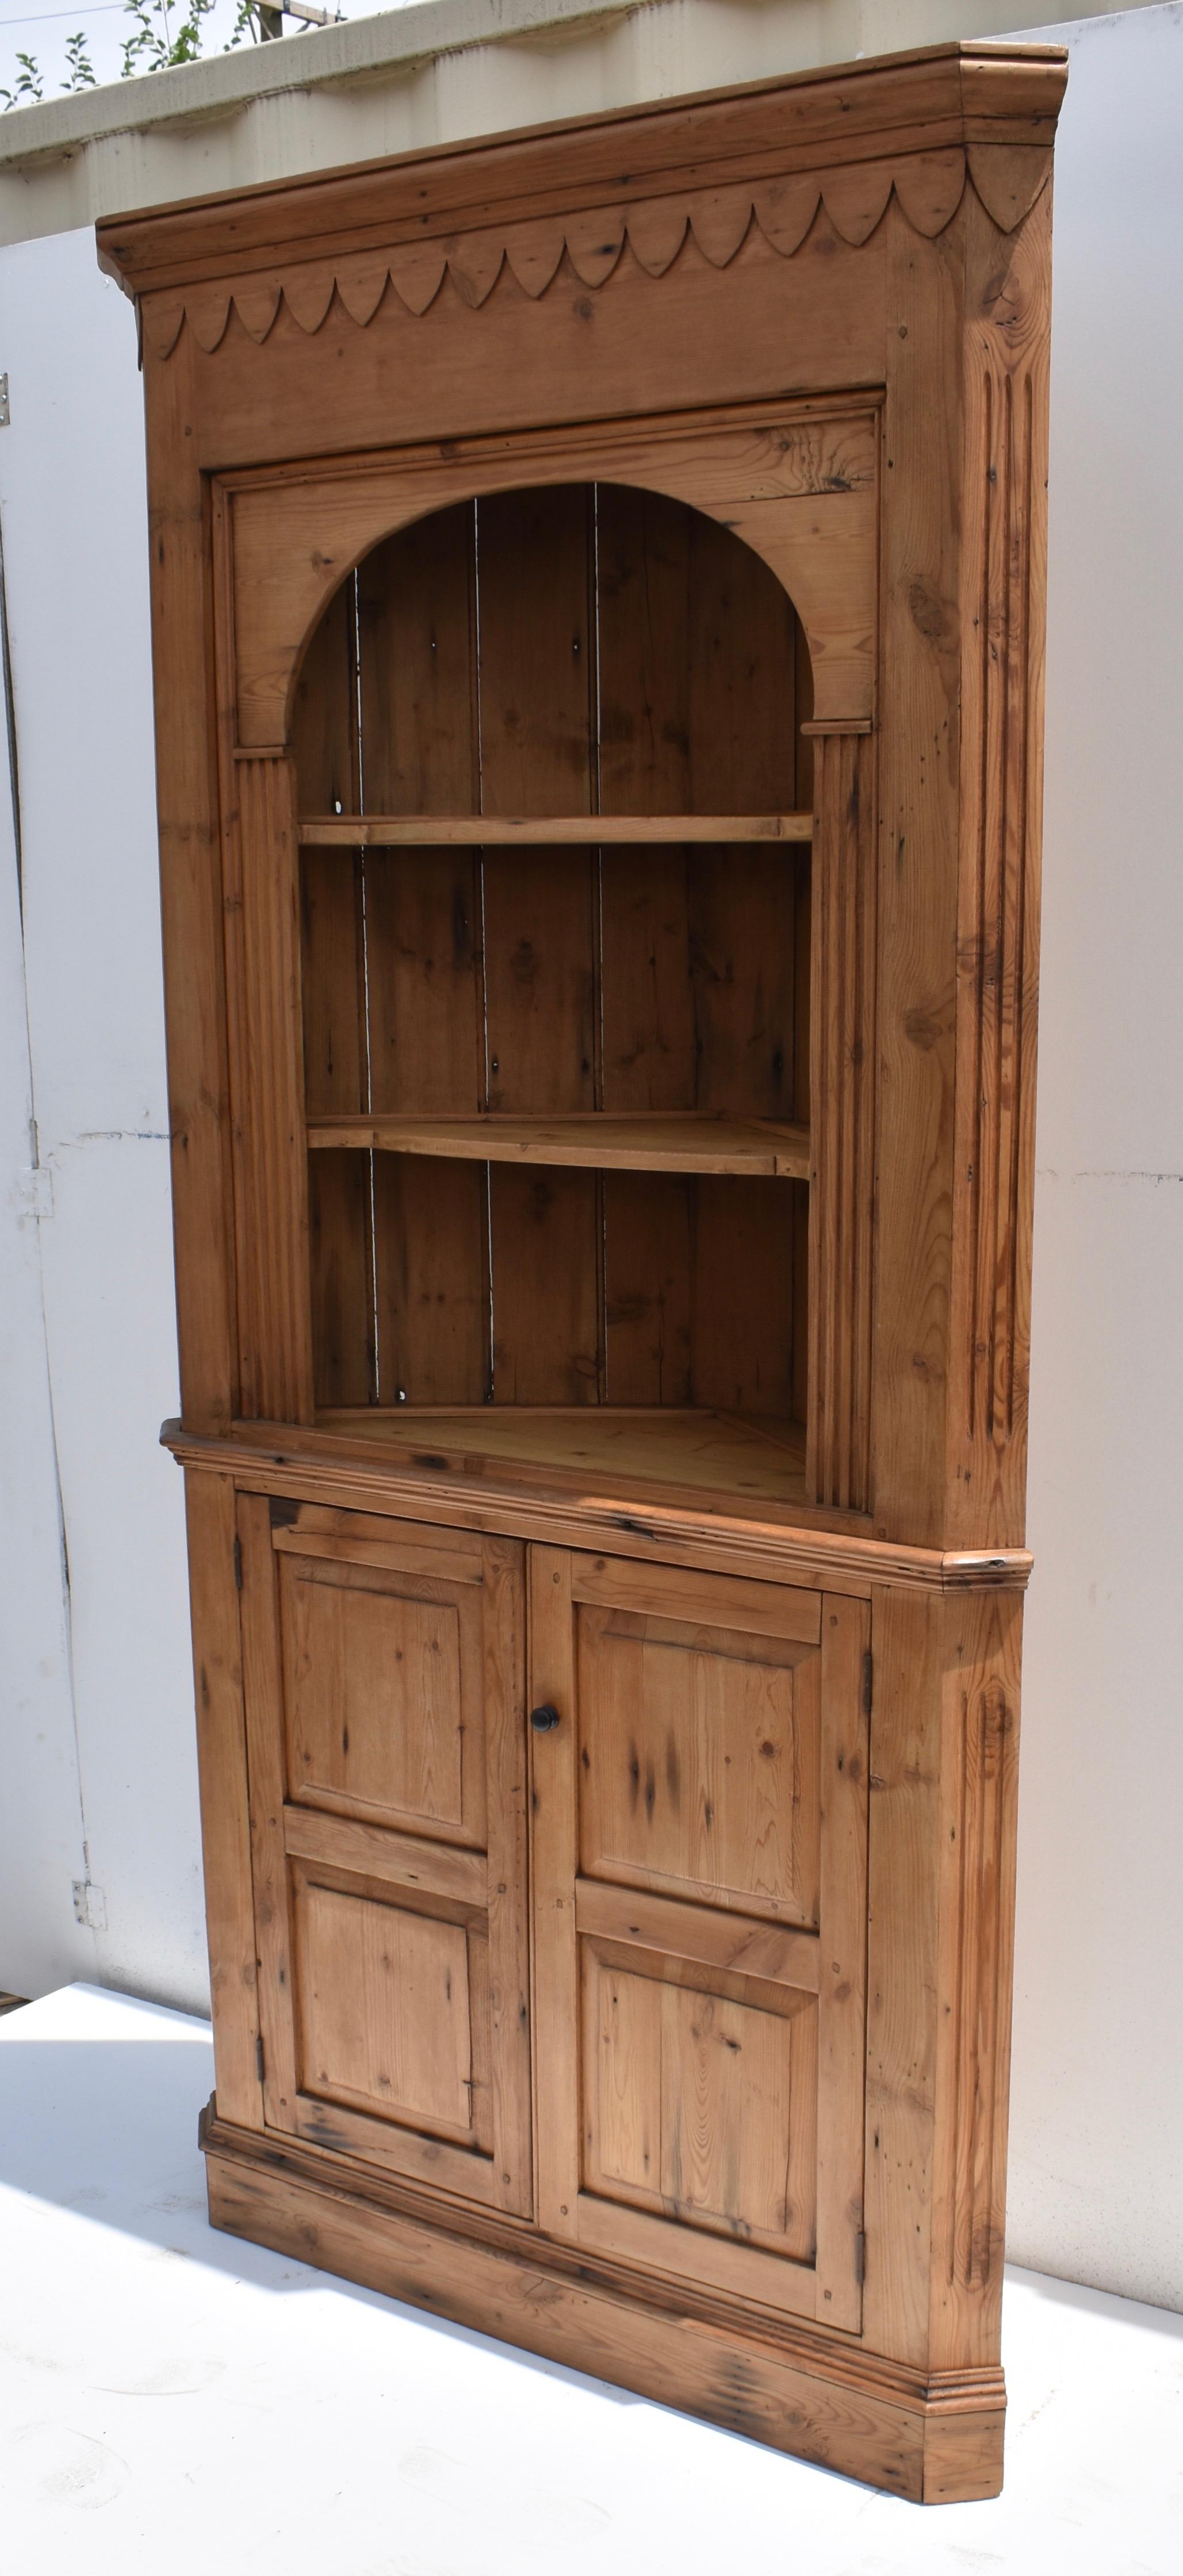 This is a very attractive pine corner cupboard, tall and shallow and full of character.  In the upper section a deep frieze is crowned with bold molding and applied gadroons, incised fluting on the chamfered front corners framing an arched fascia,